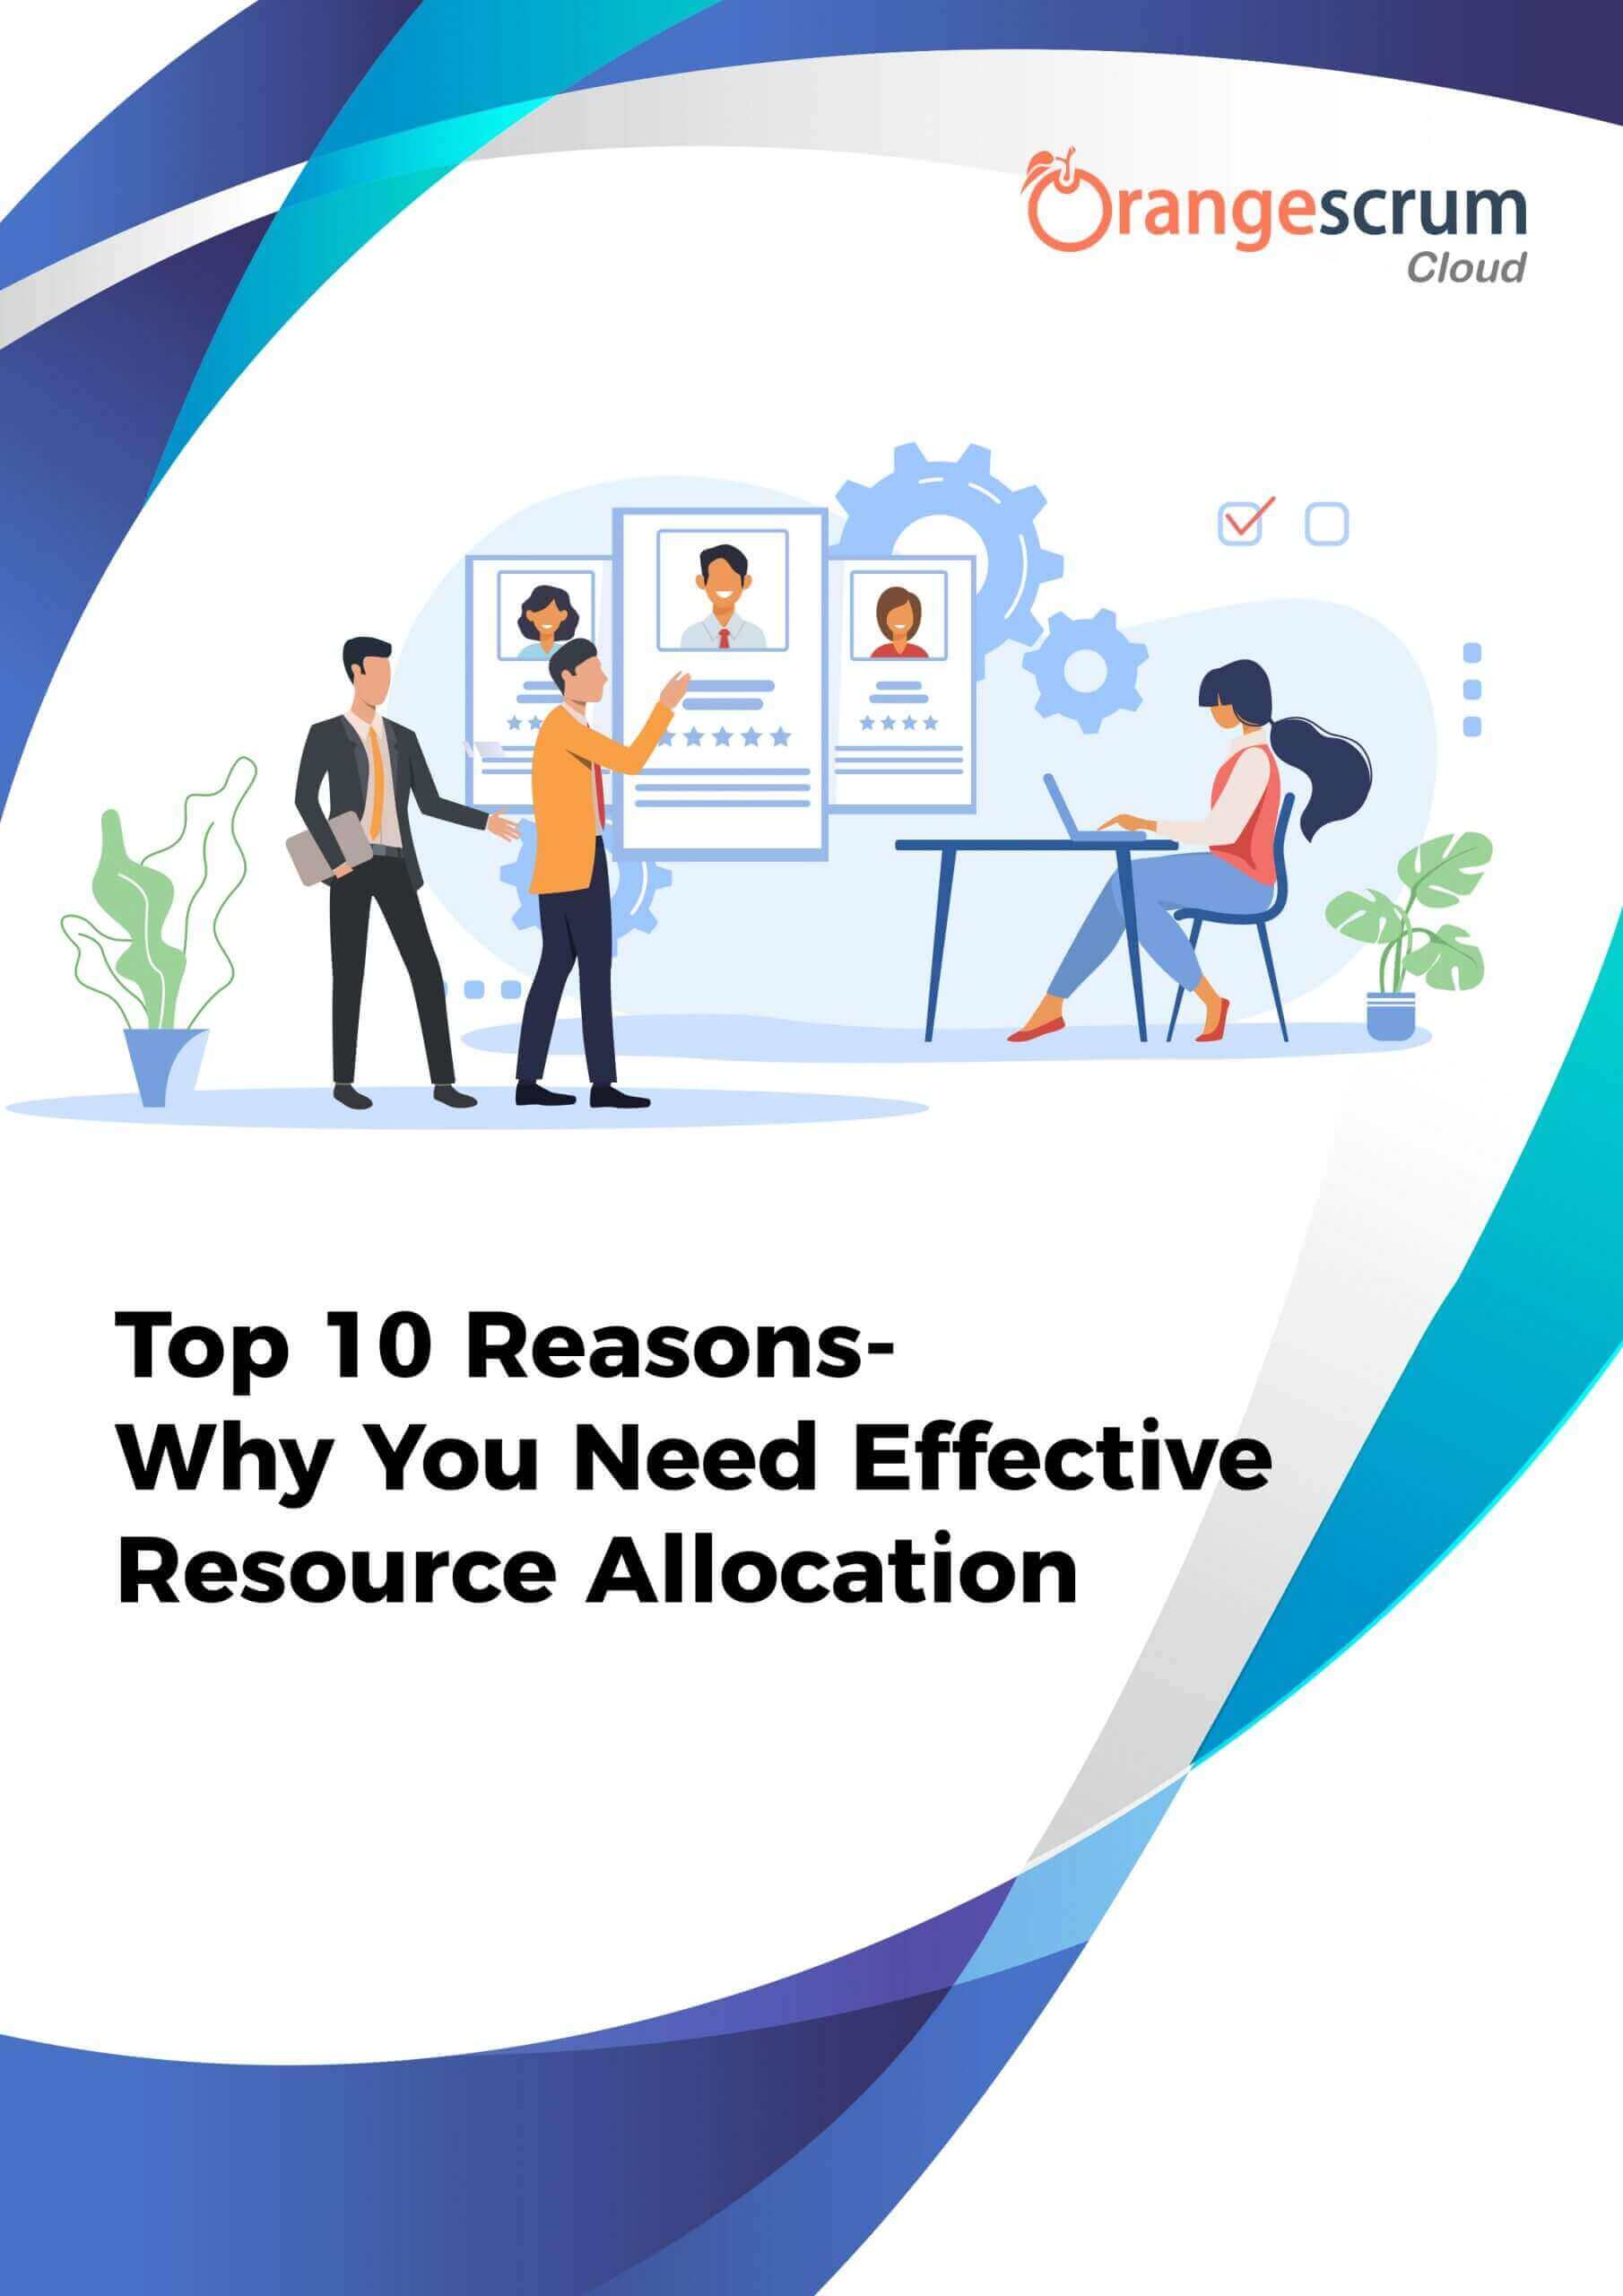 Top 10 Reasons- Why You Need Effective Resource Allocation